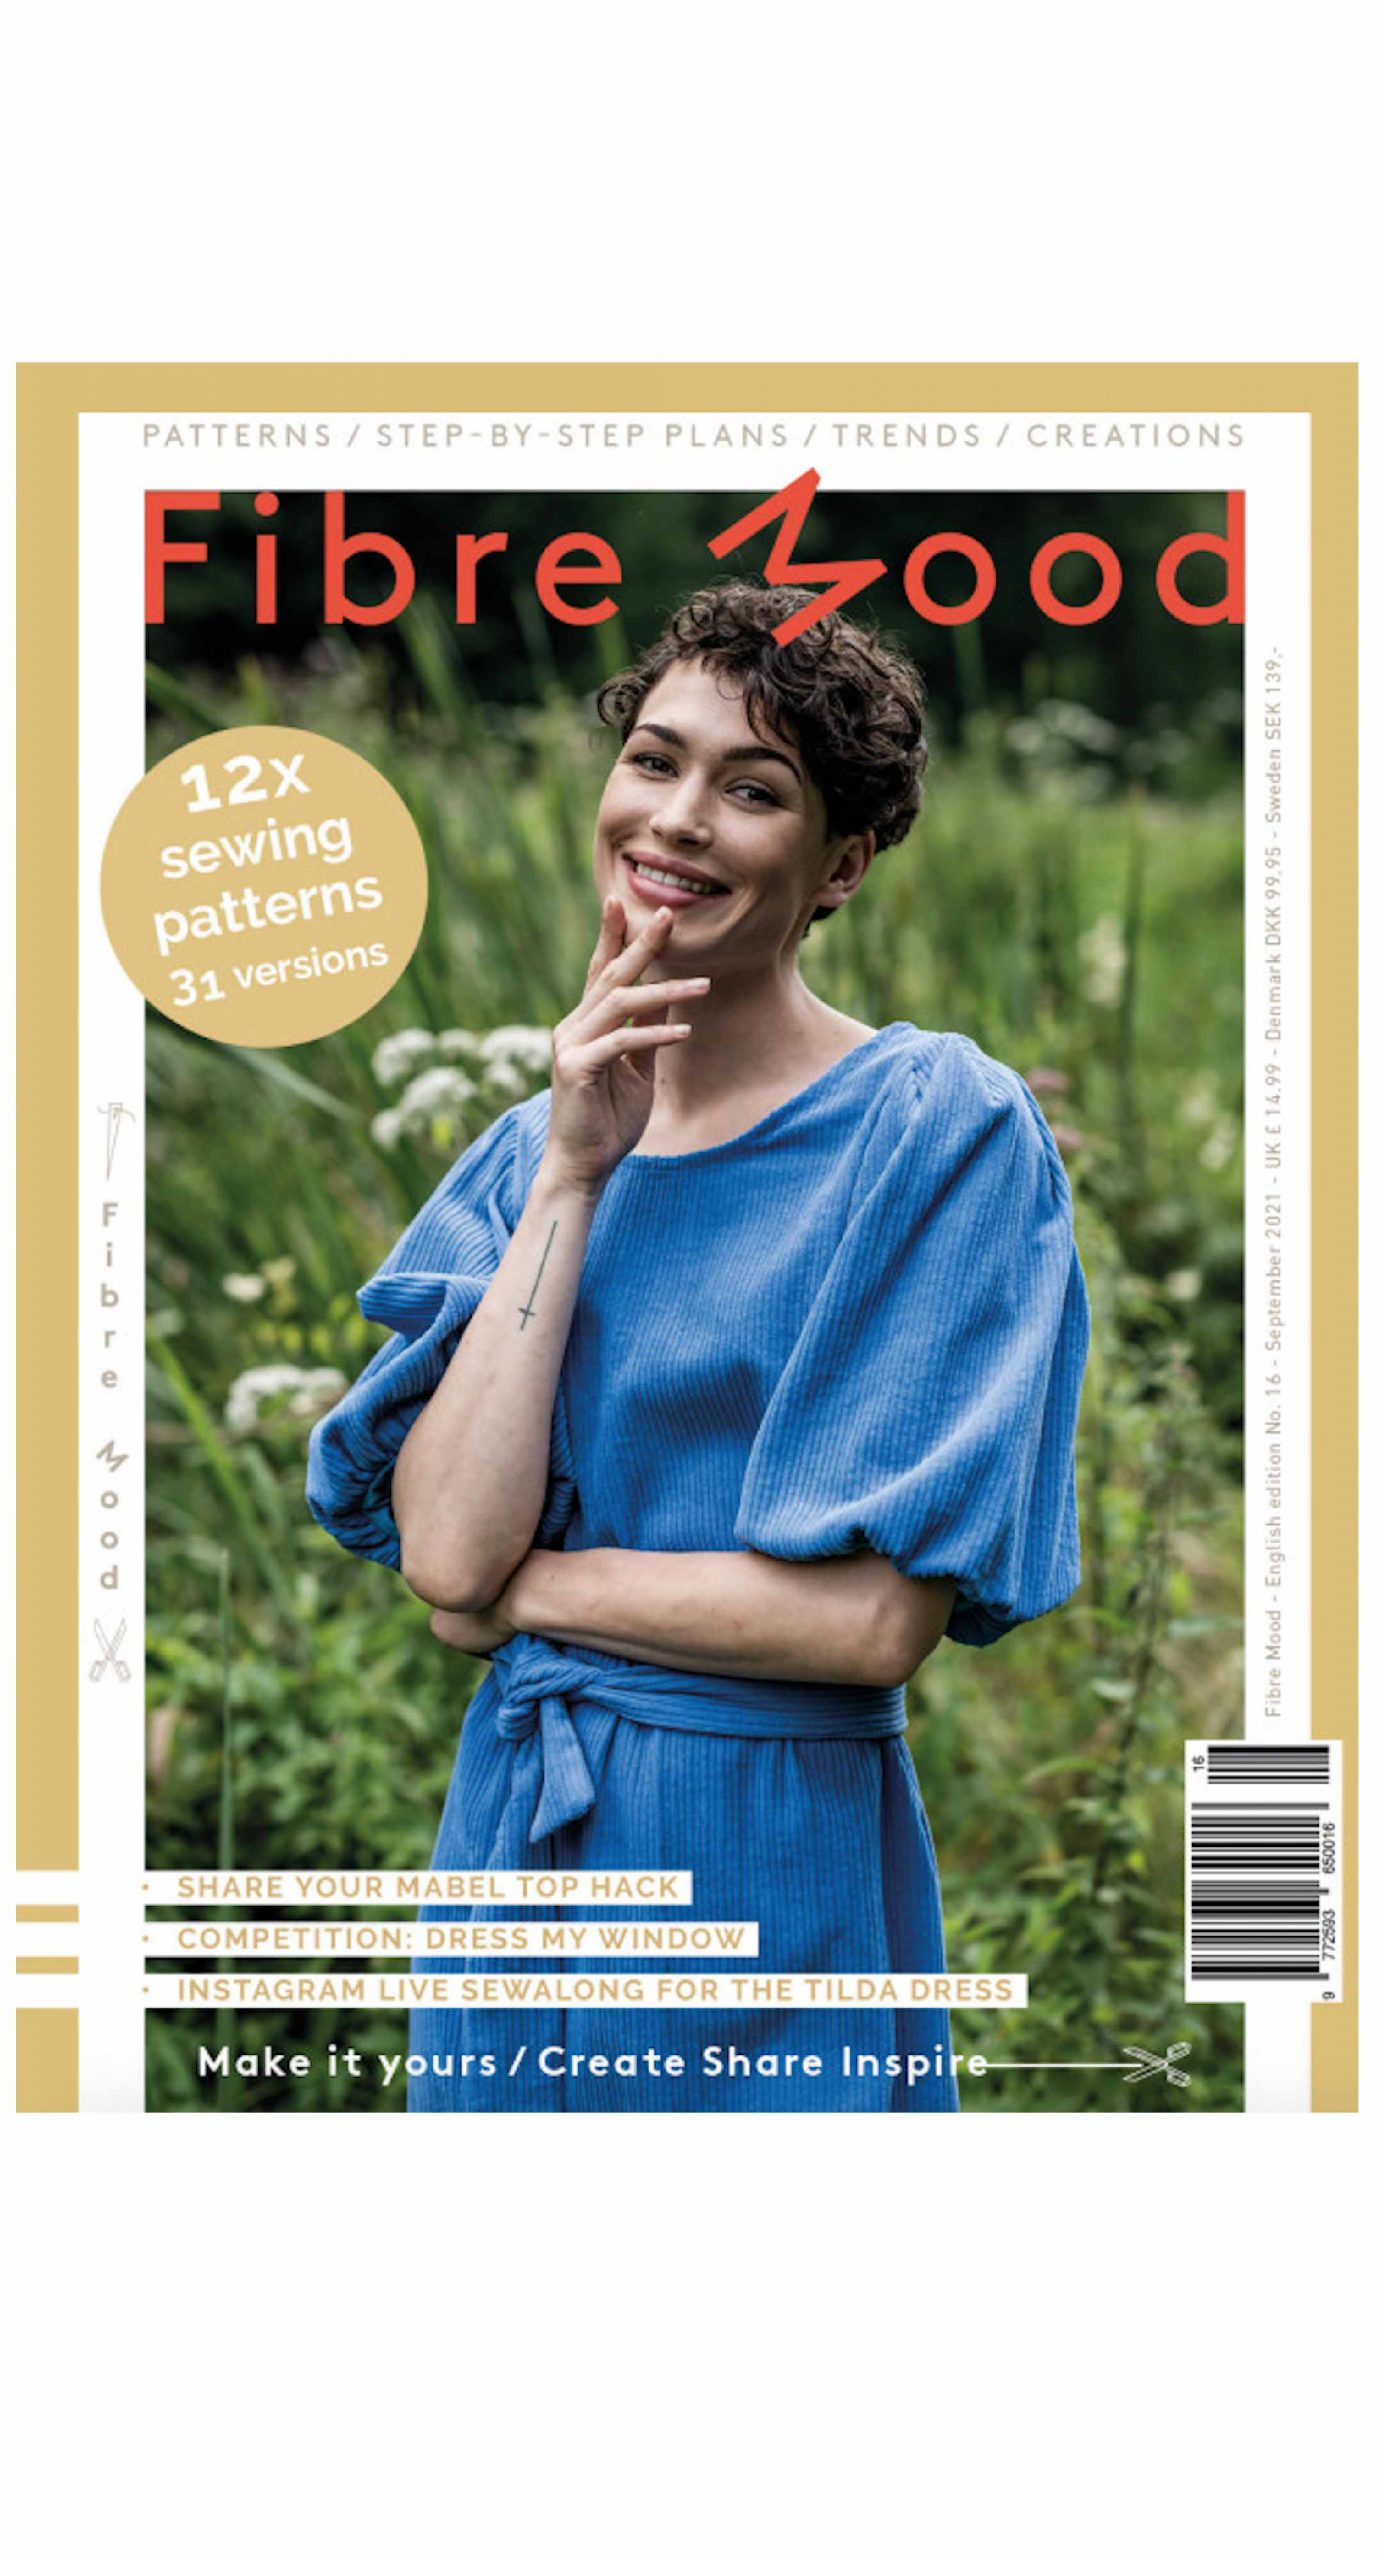 A sewing pattern magazine from Fibre Mood on The Fold Line. A magazine with 12 patterns and 31 style variations for autumn, including women’s trousers, skirts, tops, dresses, blouses, jacket, body warmer, and children’s dress and body warmer.